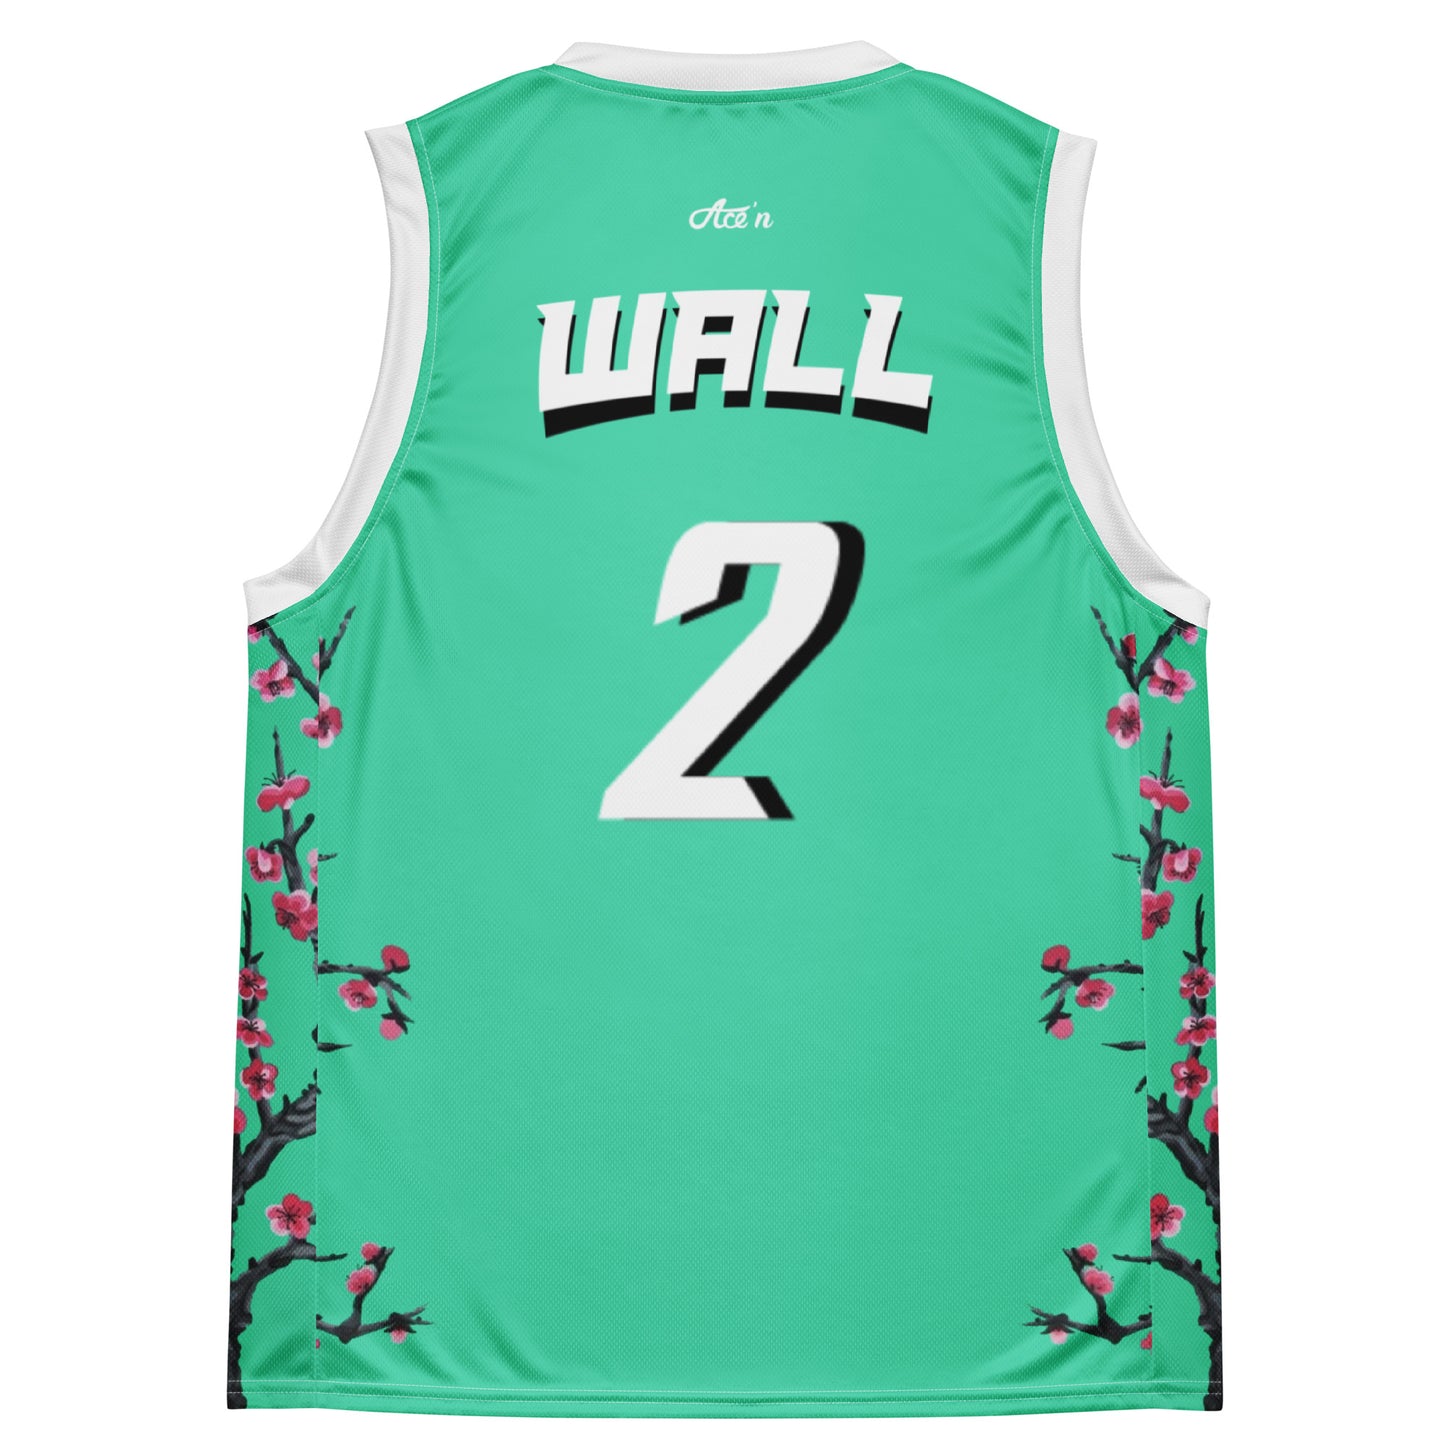 Ace'n "D.C." Jersey | Wall/#2